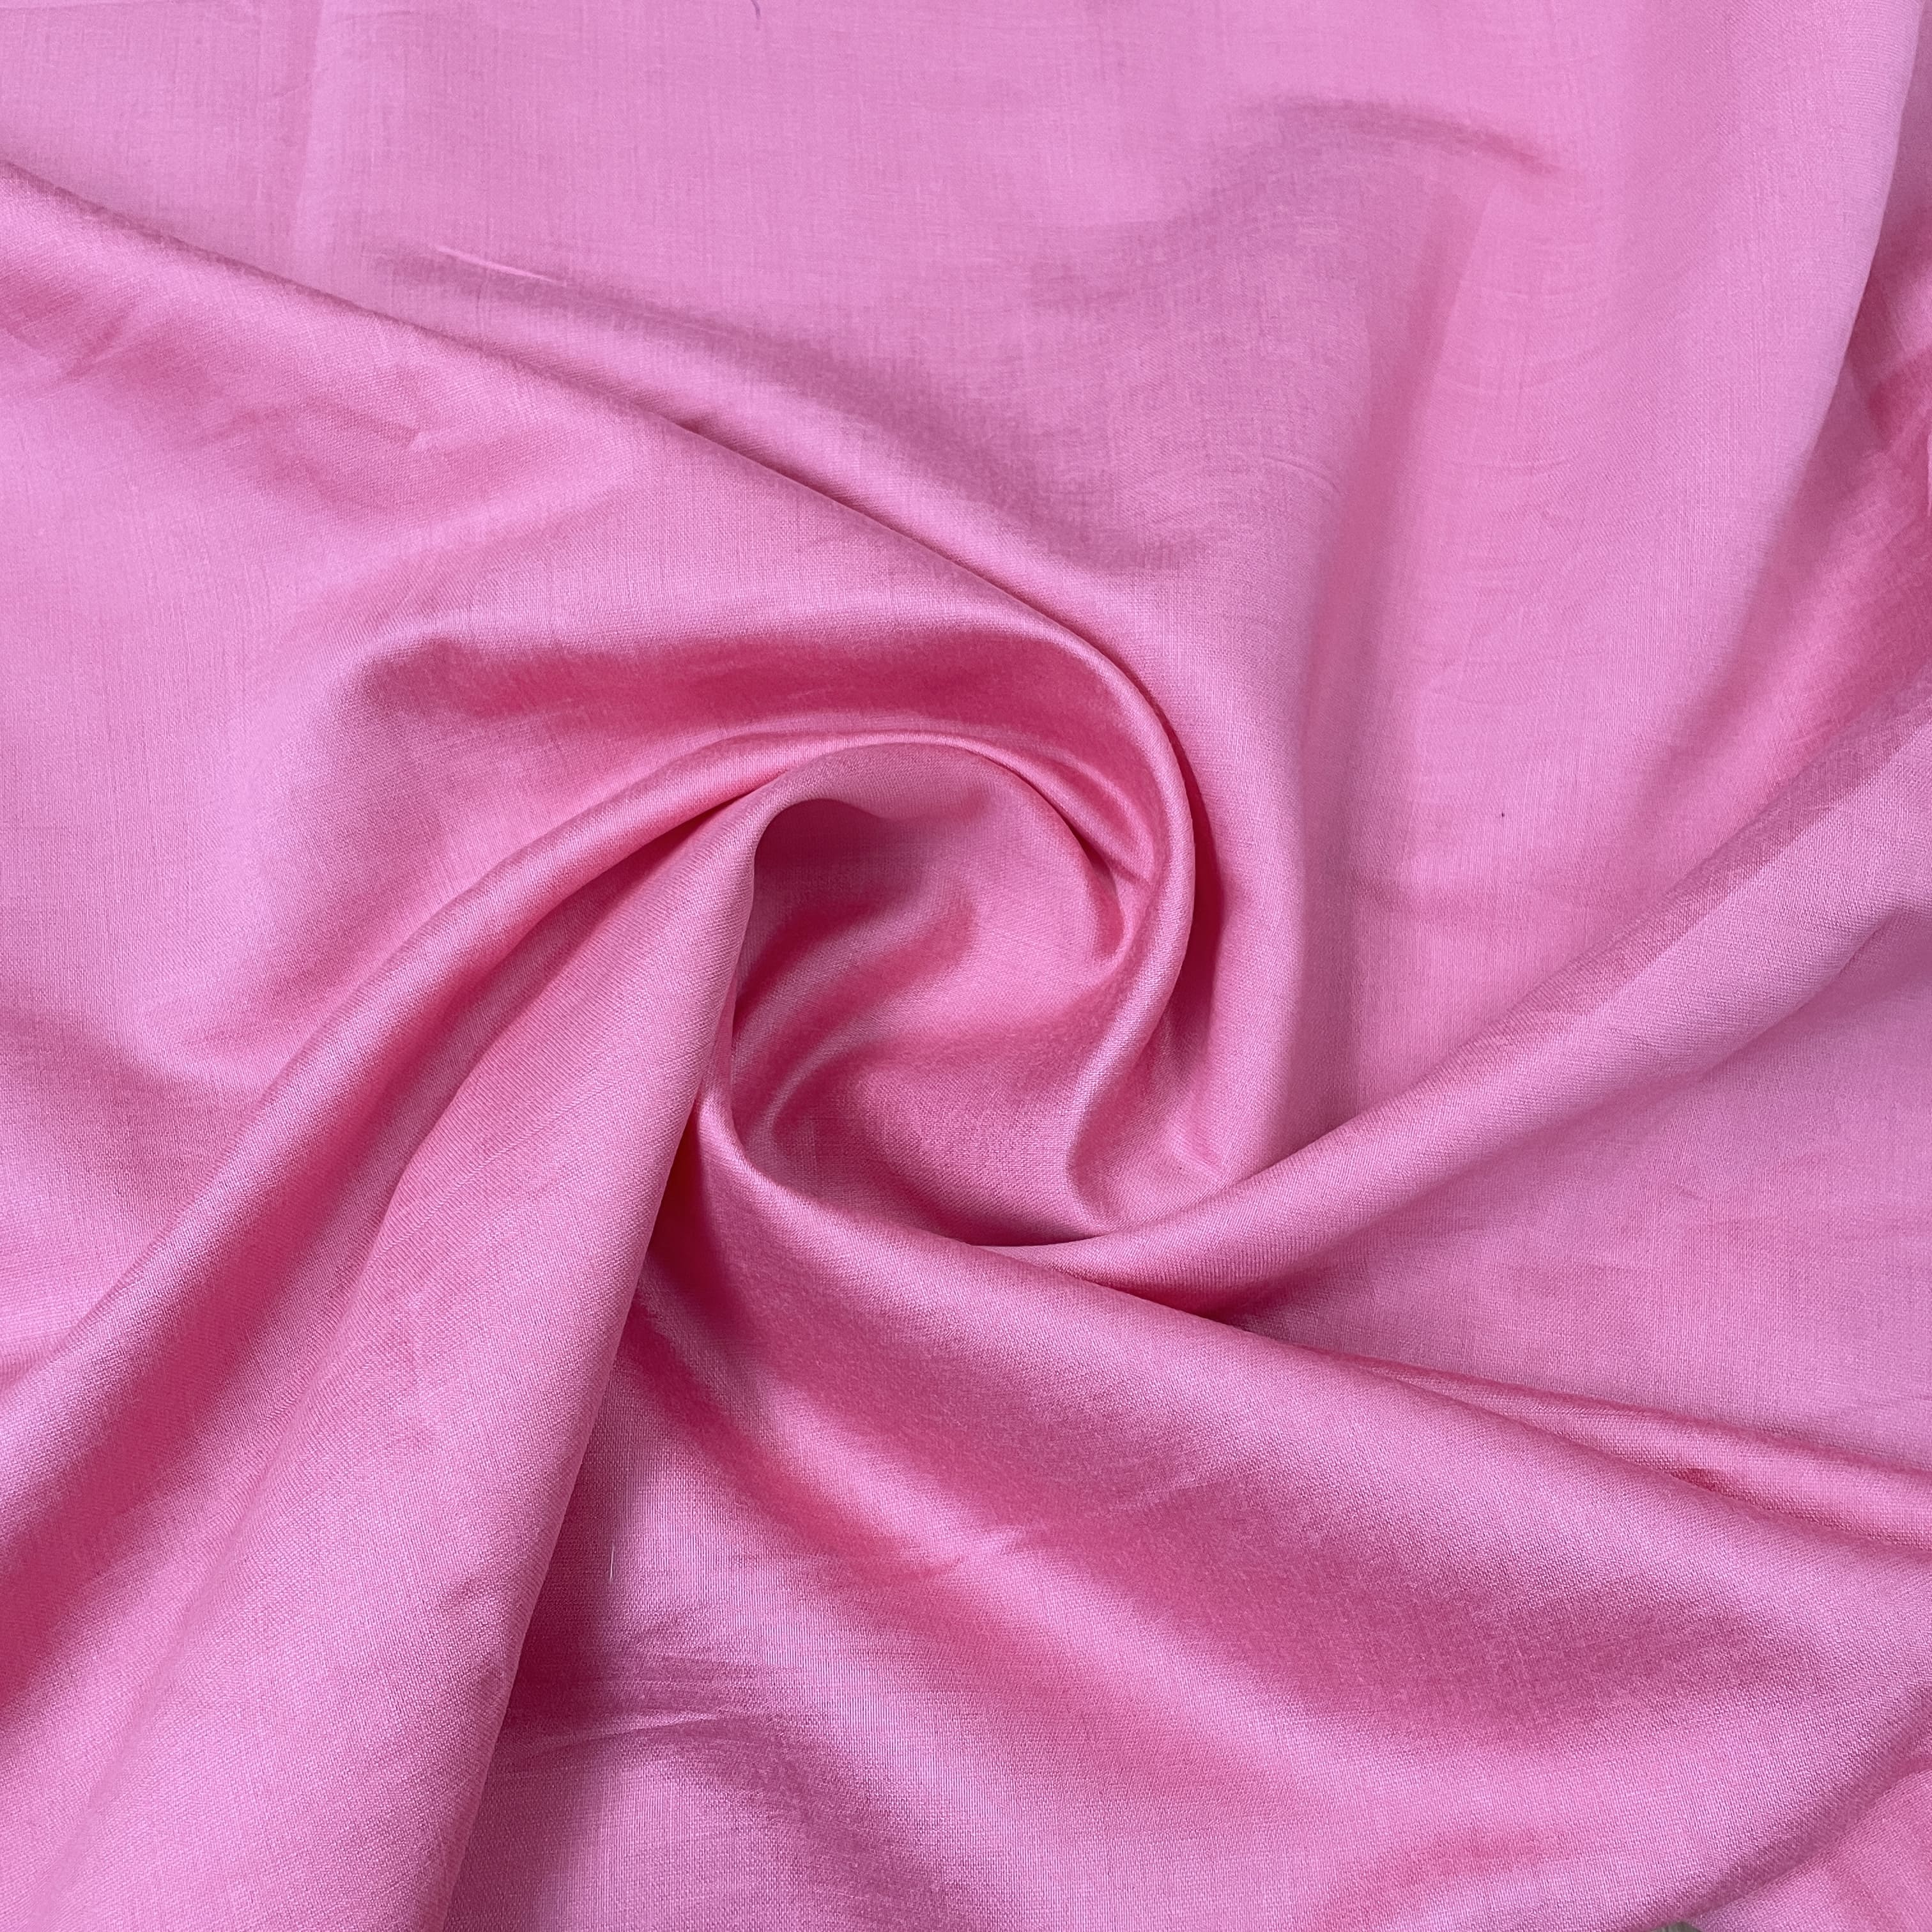 Buy Baby Pink Plain Satin Georgette Fabric Online At Wholesale